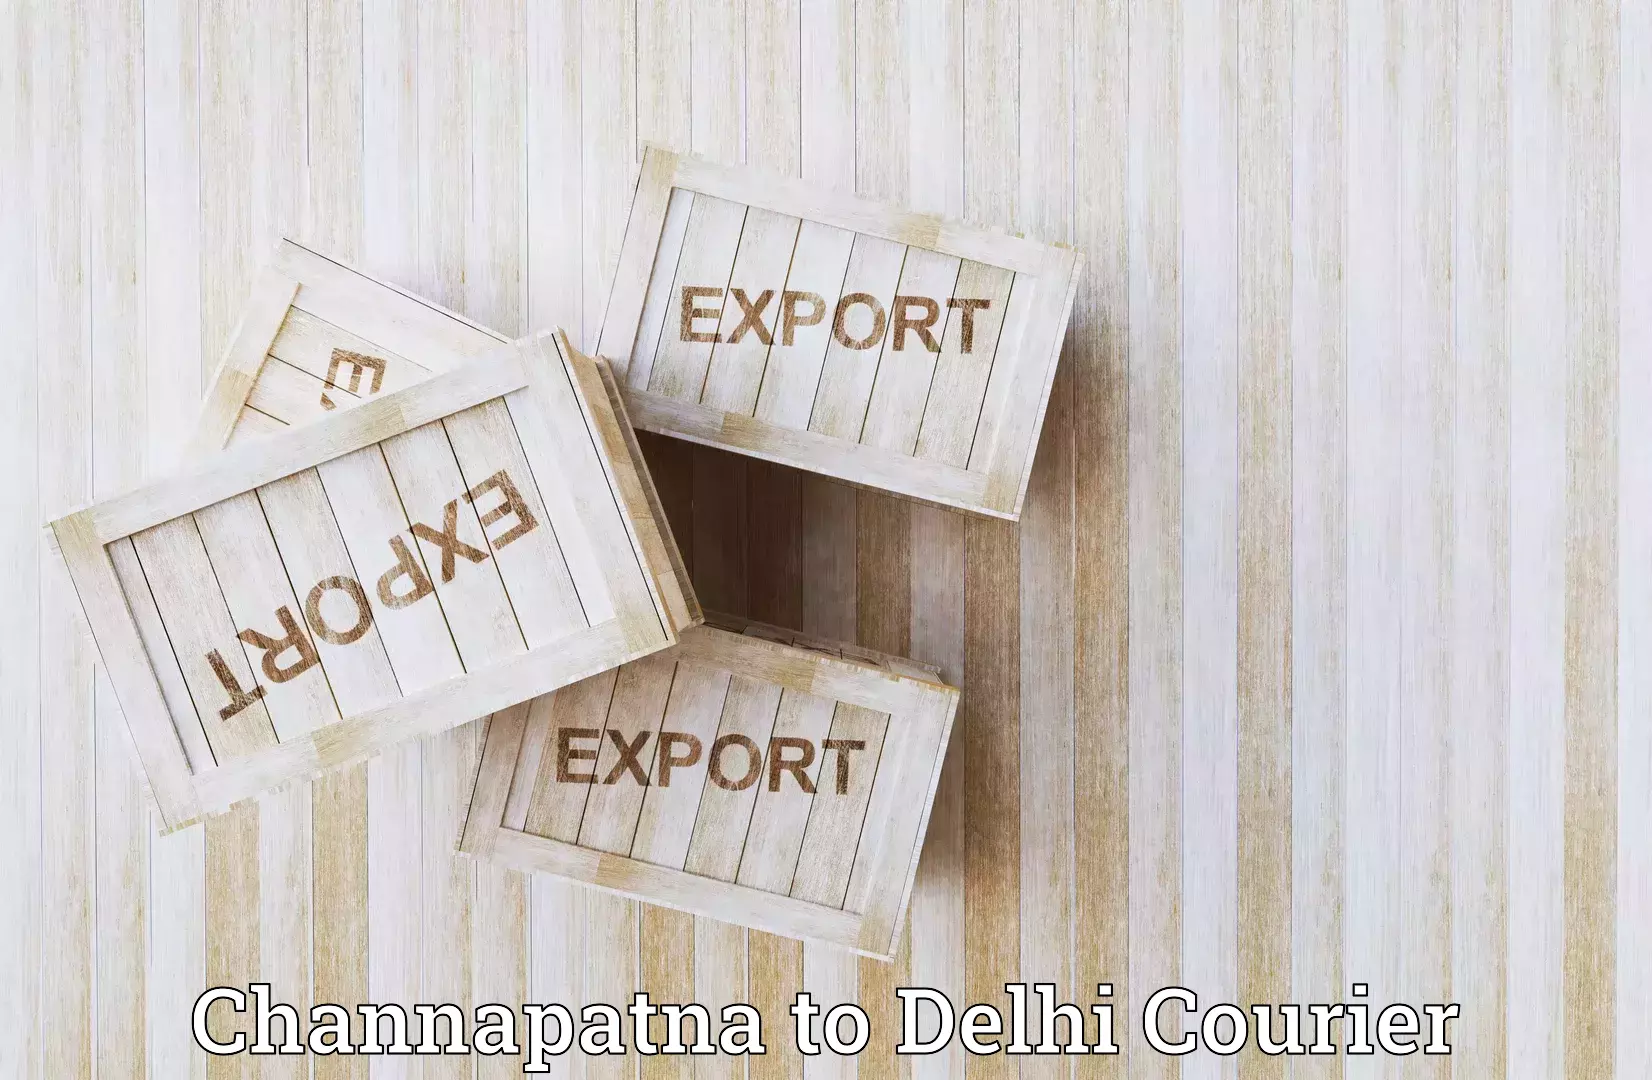 Efficient freight service Channapatna to University of Delhi